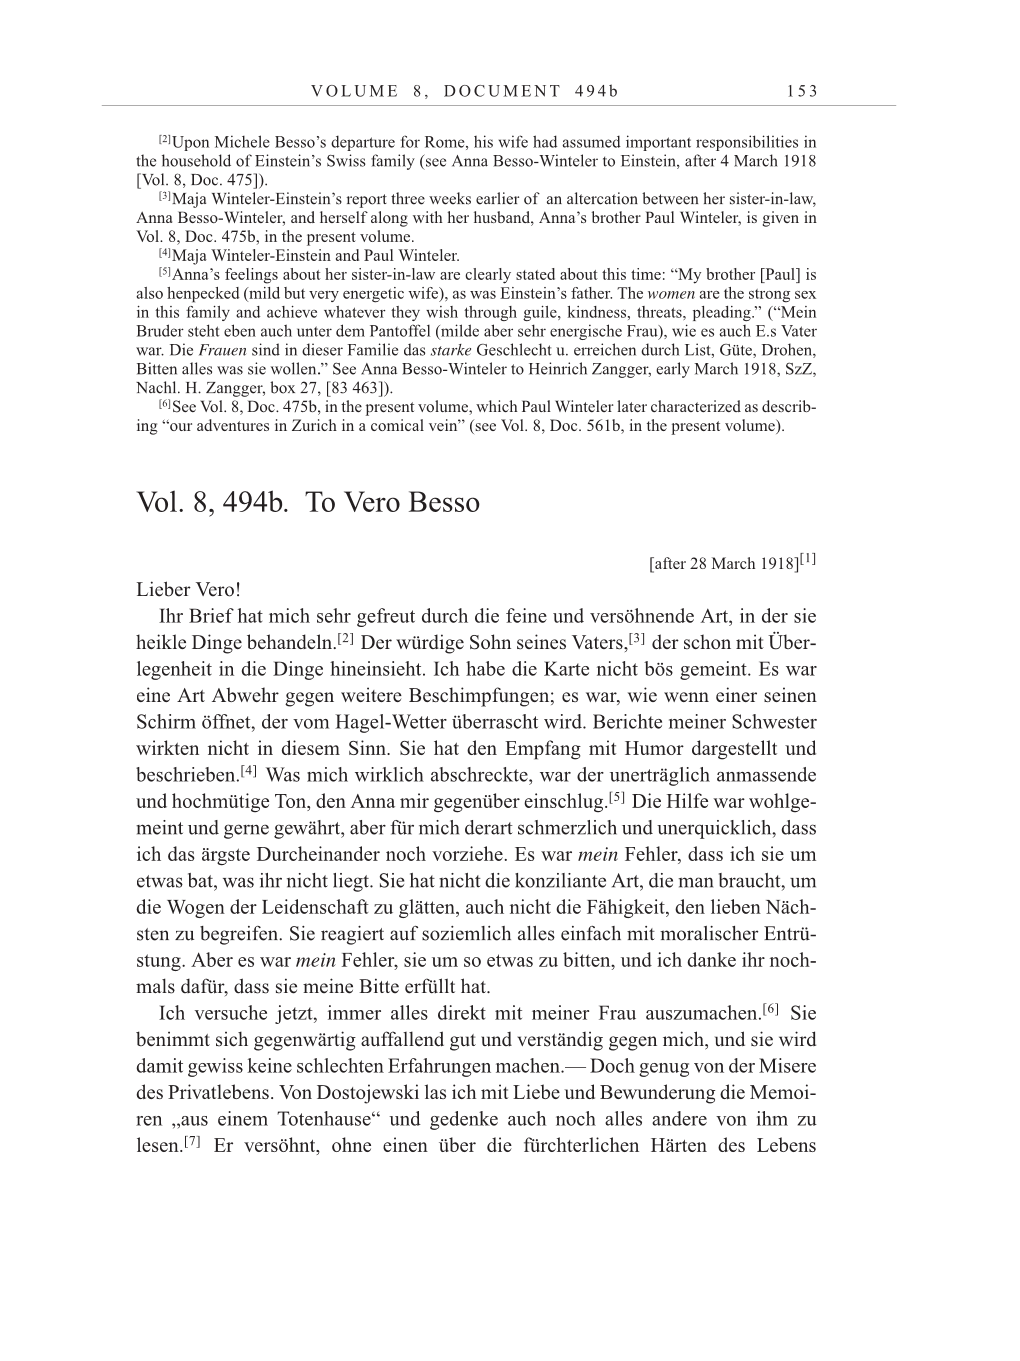 Volume 10: The Berlin Years: Correspondence May-December 1920 / Supplementary Correspondence 1909-1920 page 153